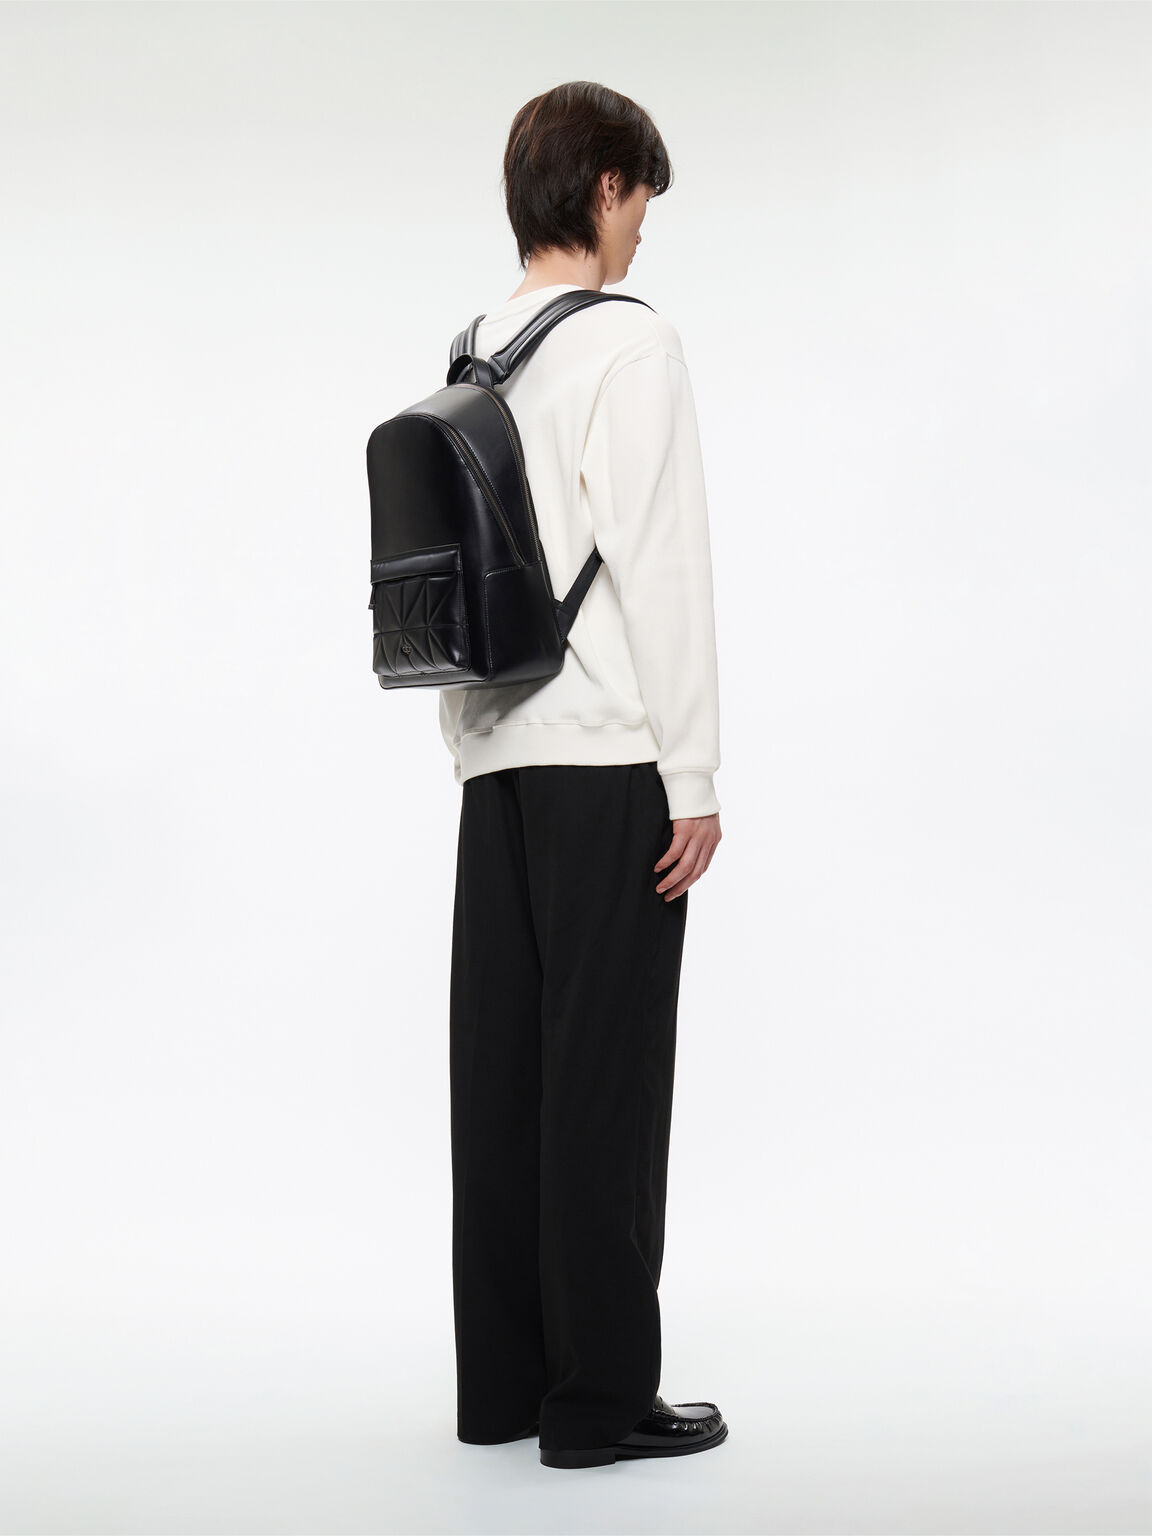 PEDRO Icon Backpack in Pixel, Black